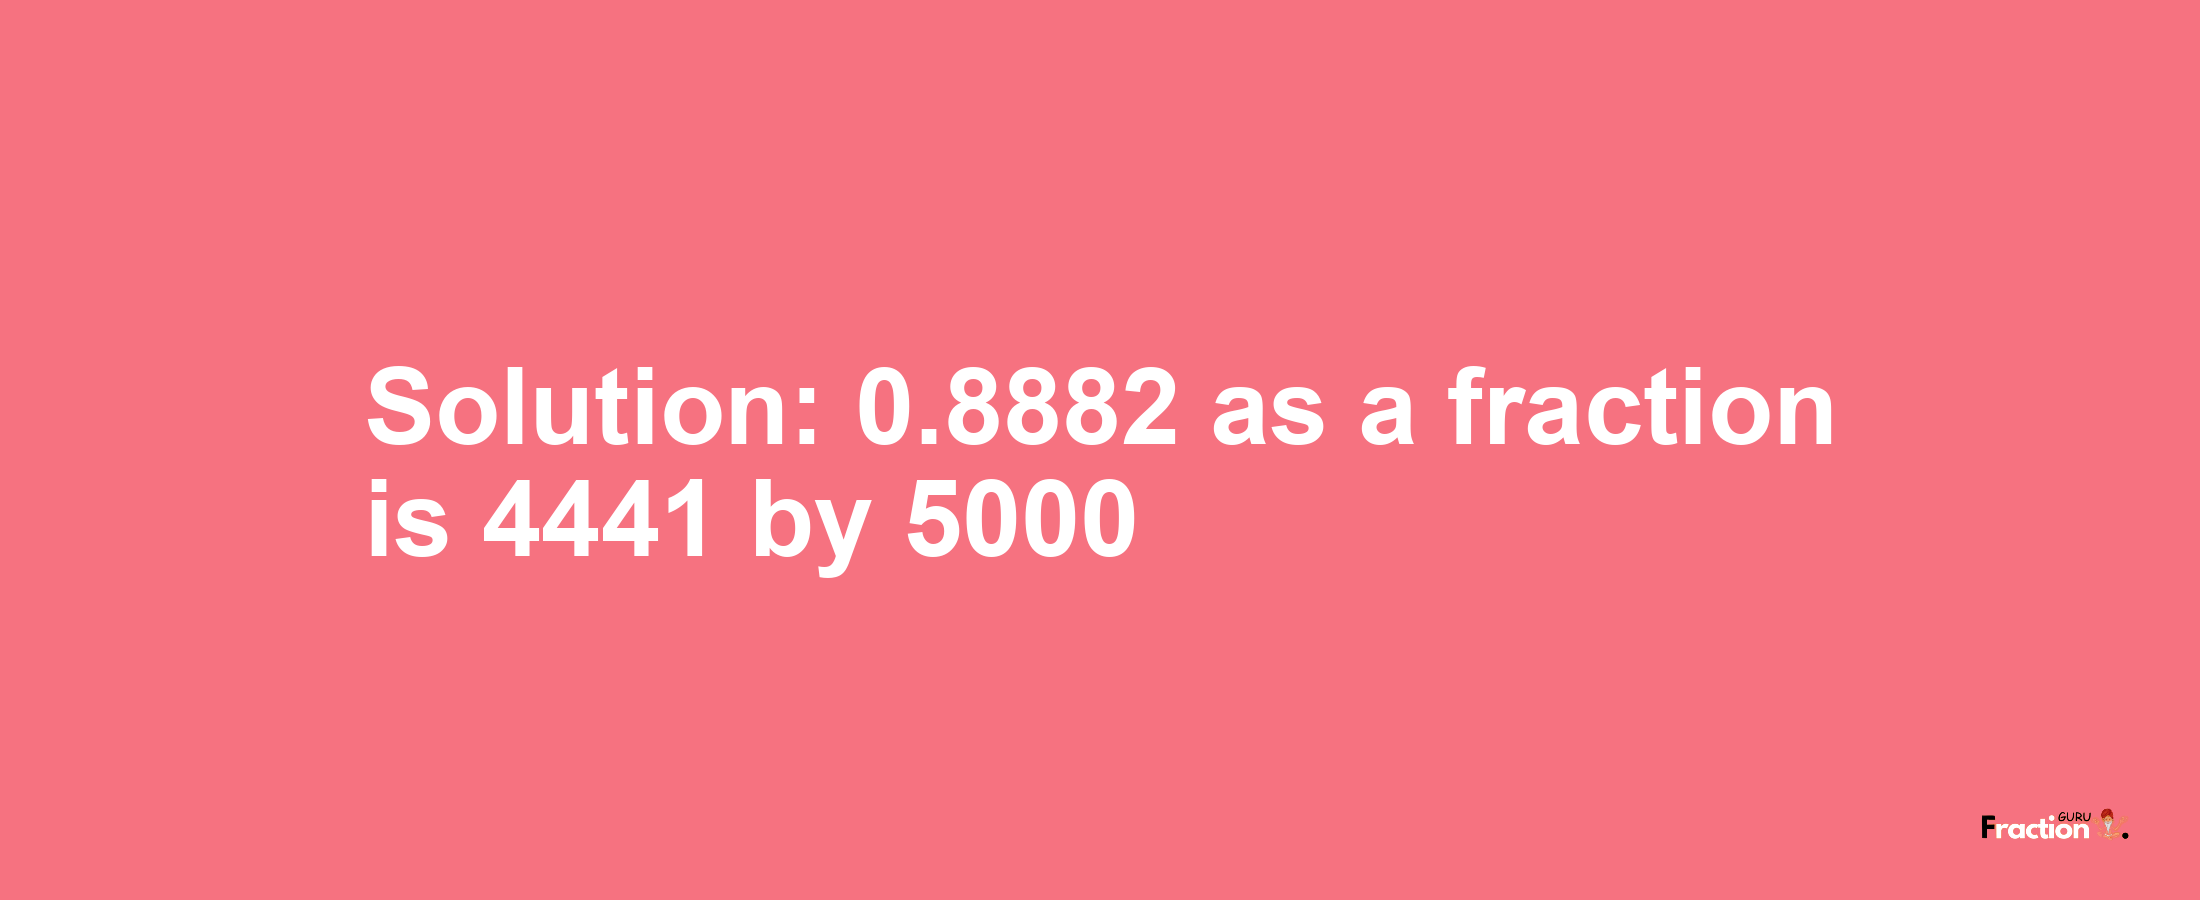 Solution:0.8882 as a fraction is 4441/5000